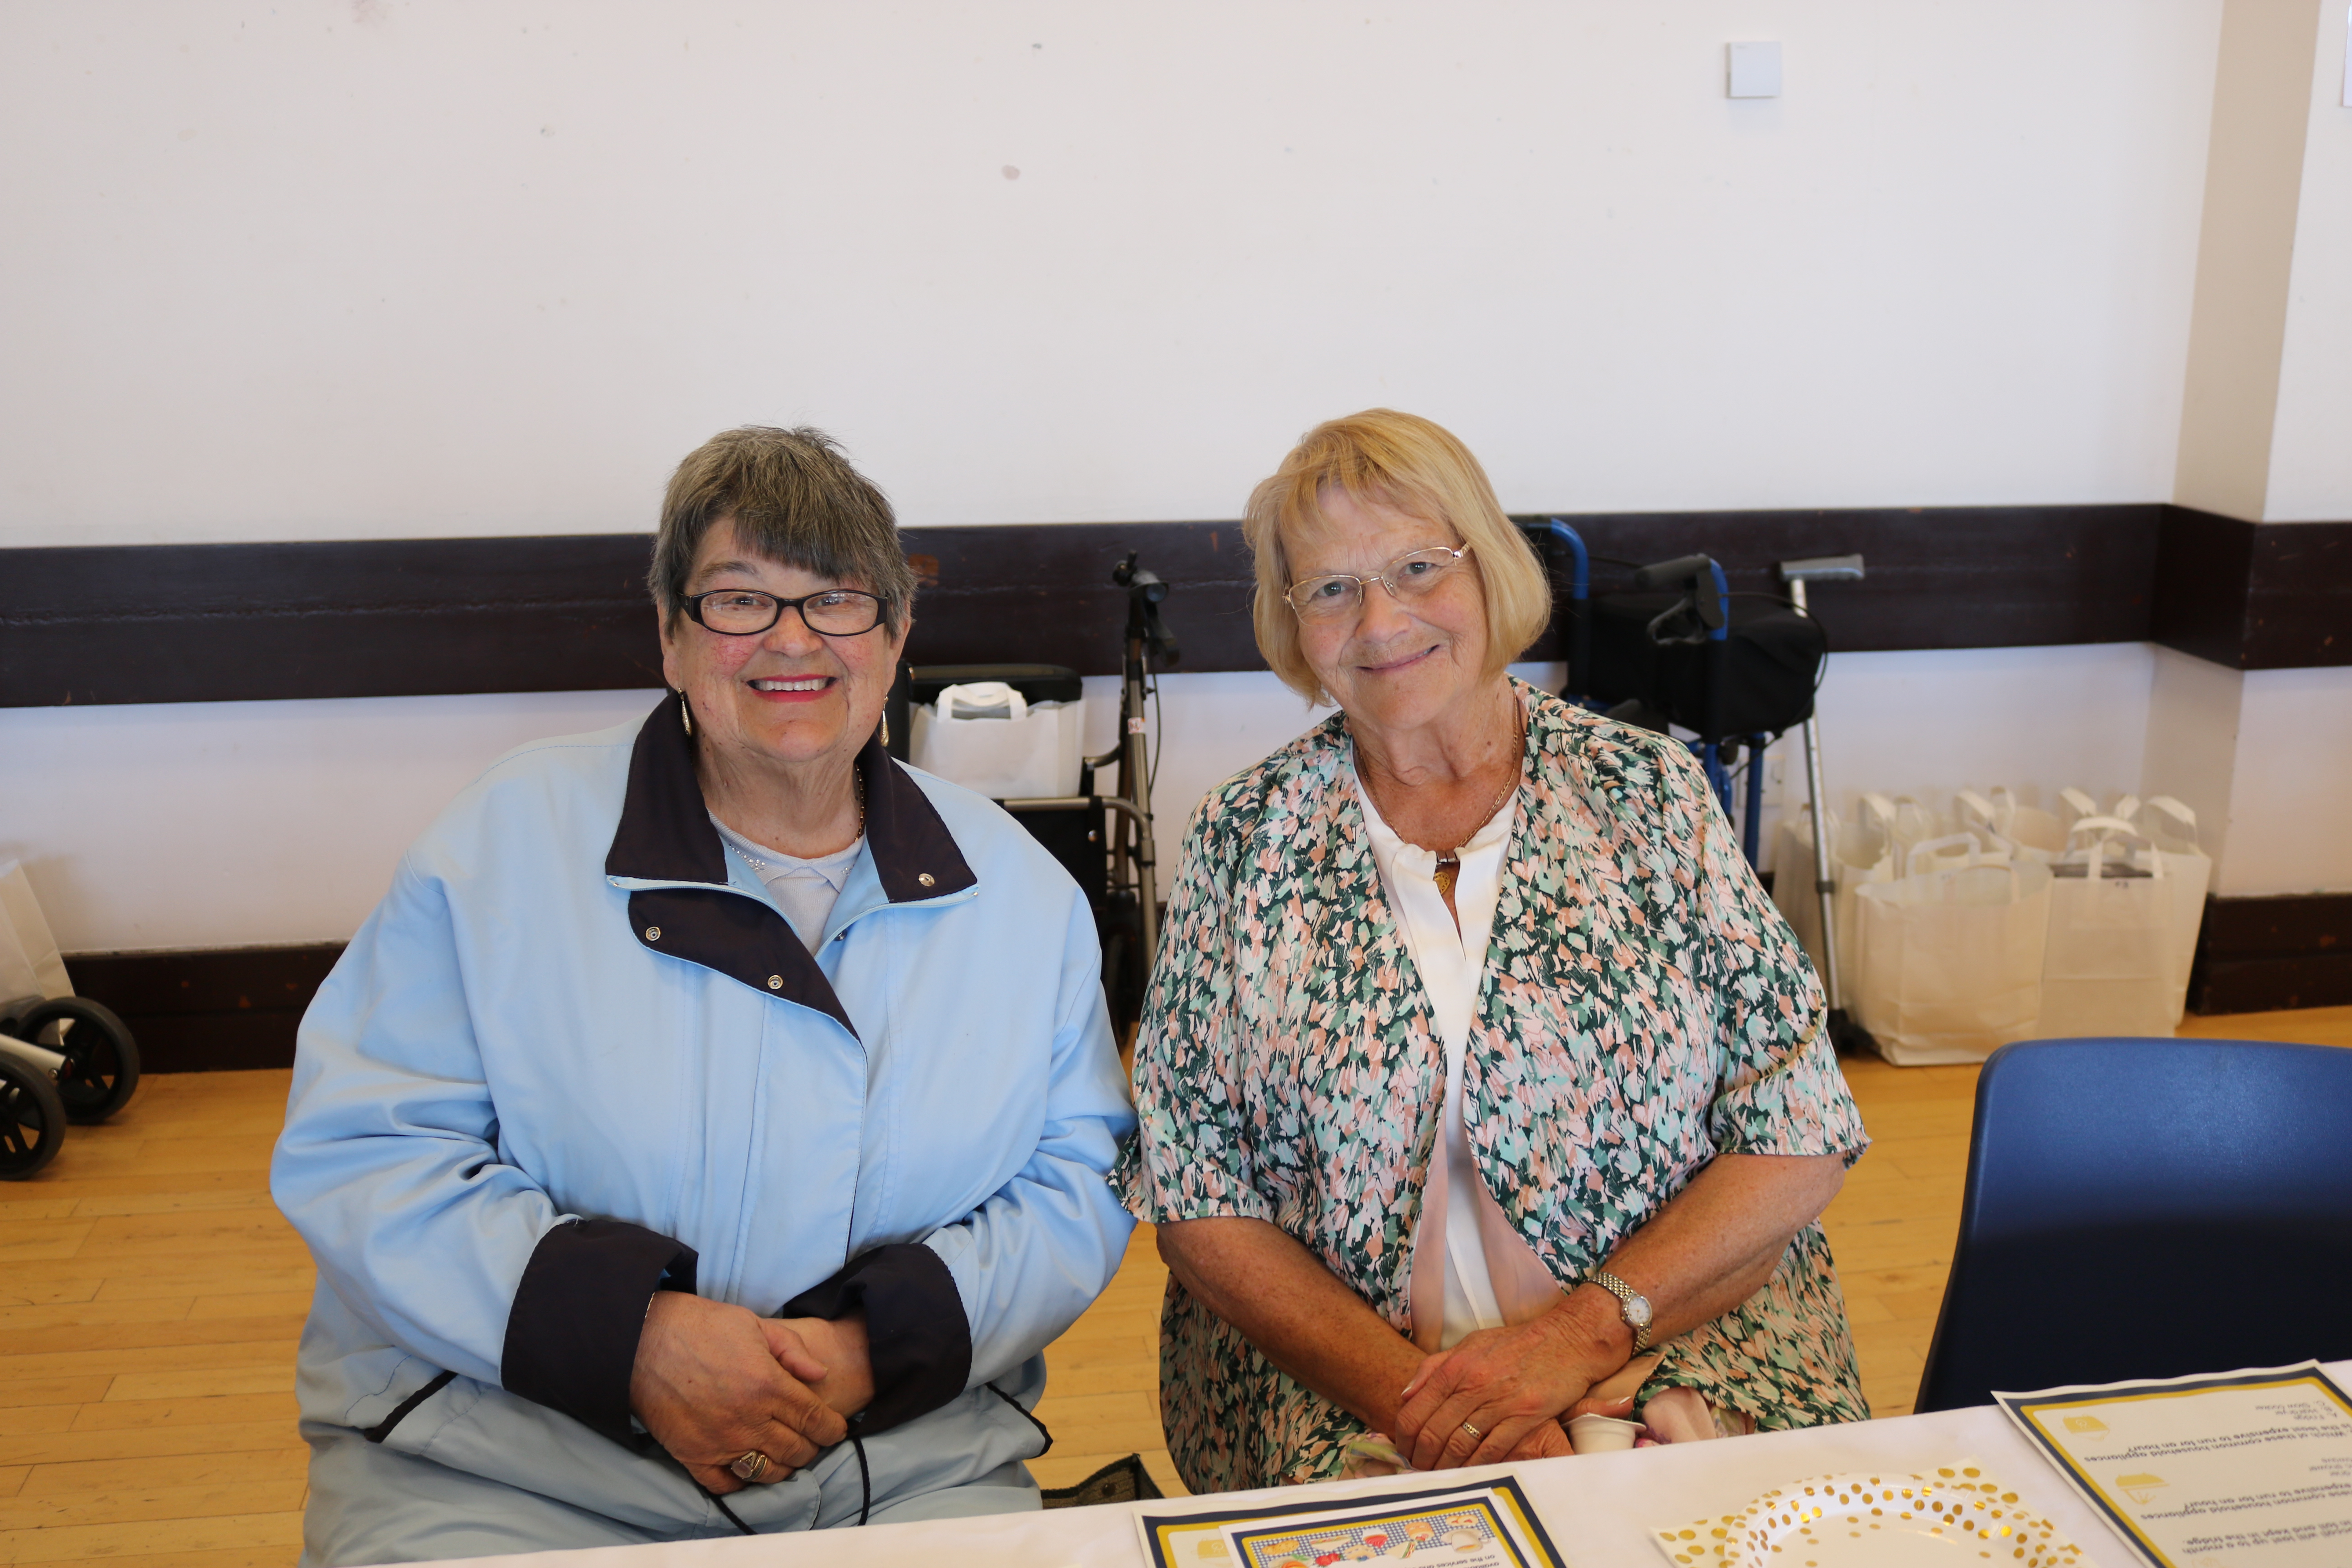 Fife Housing Group host successful second 'Senior Sessions' event for over 65s in Kirkcaldy